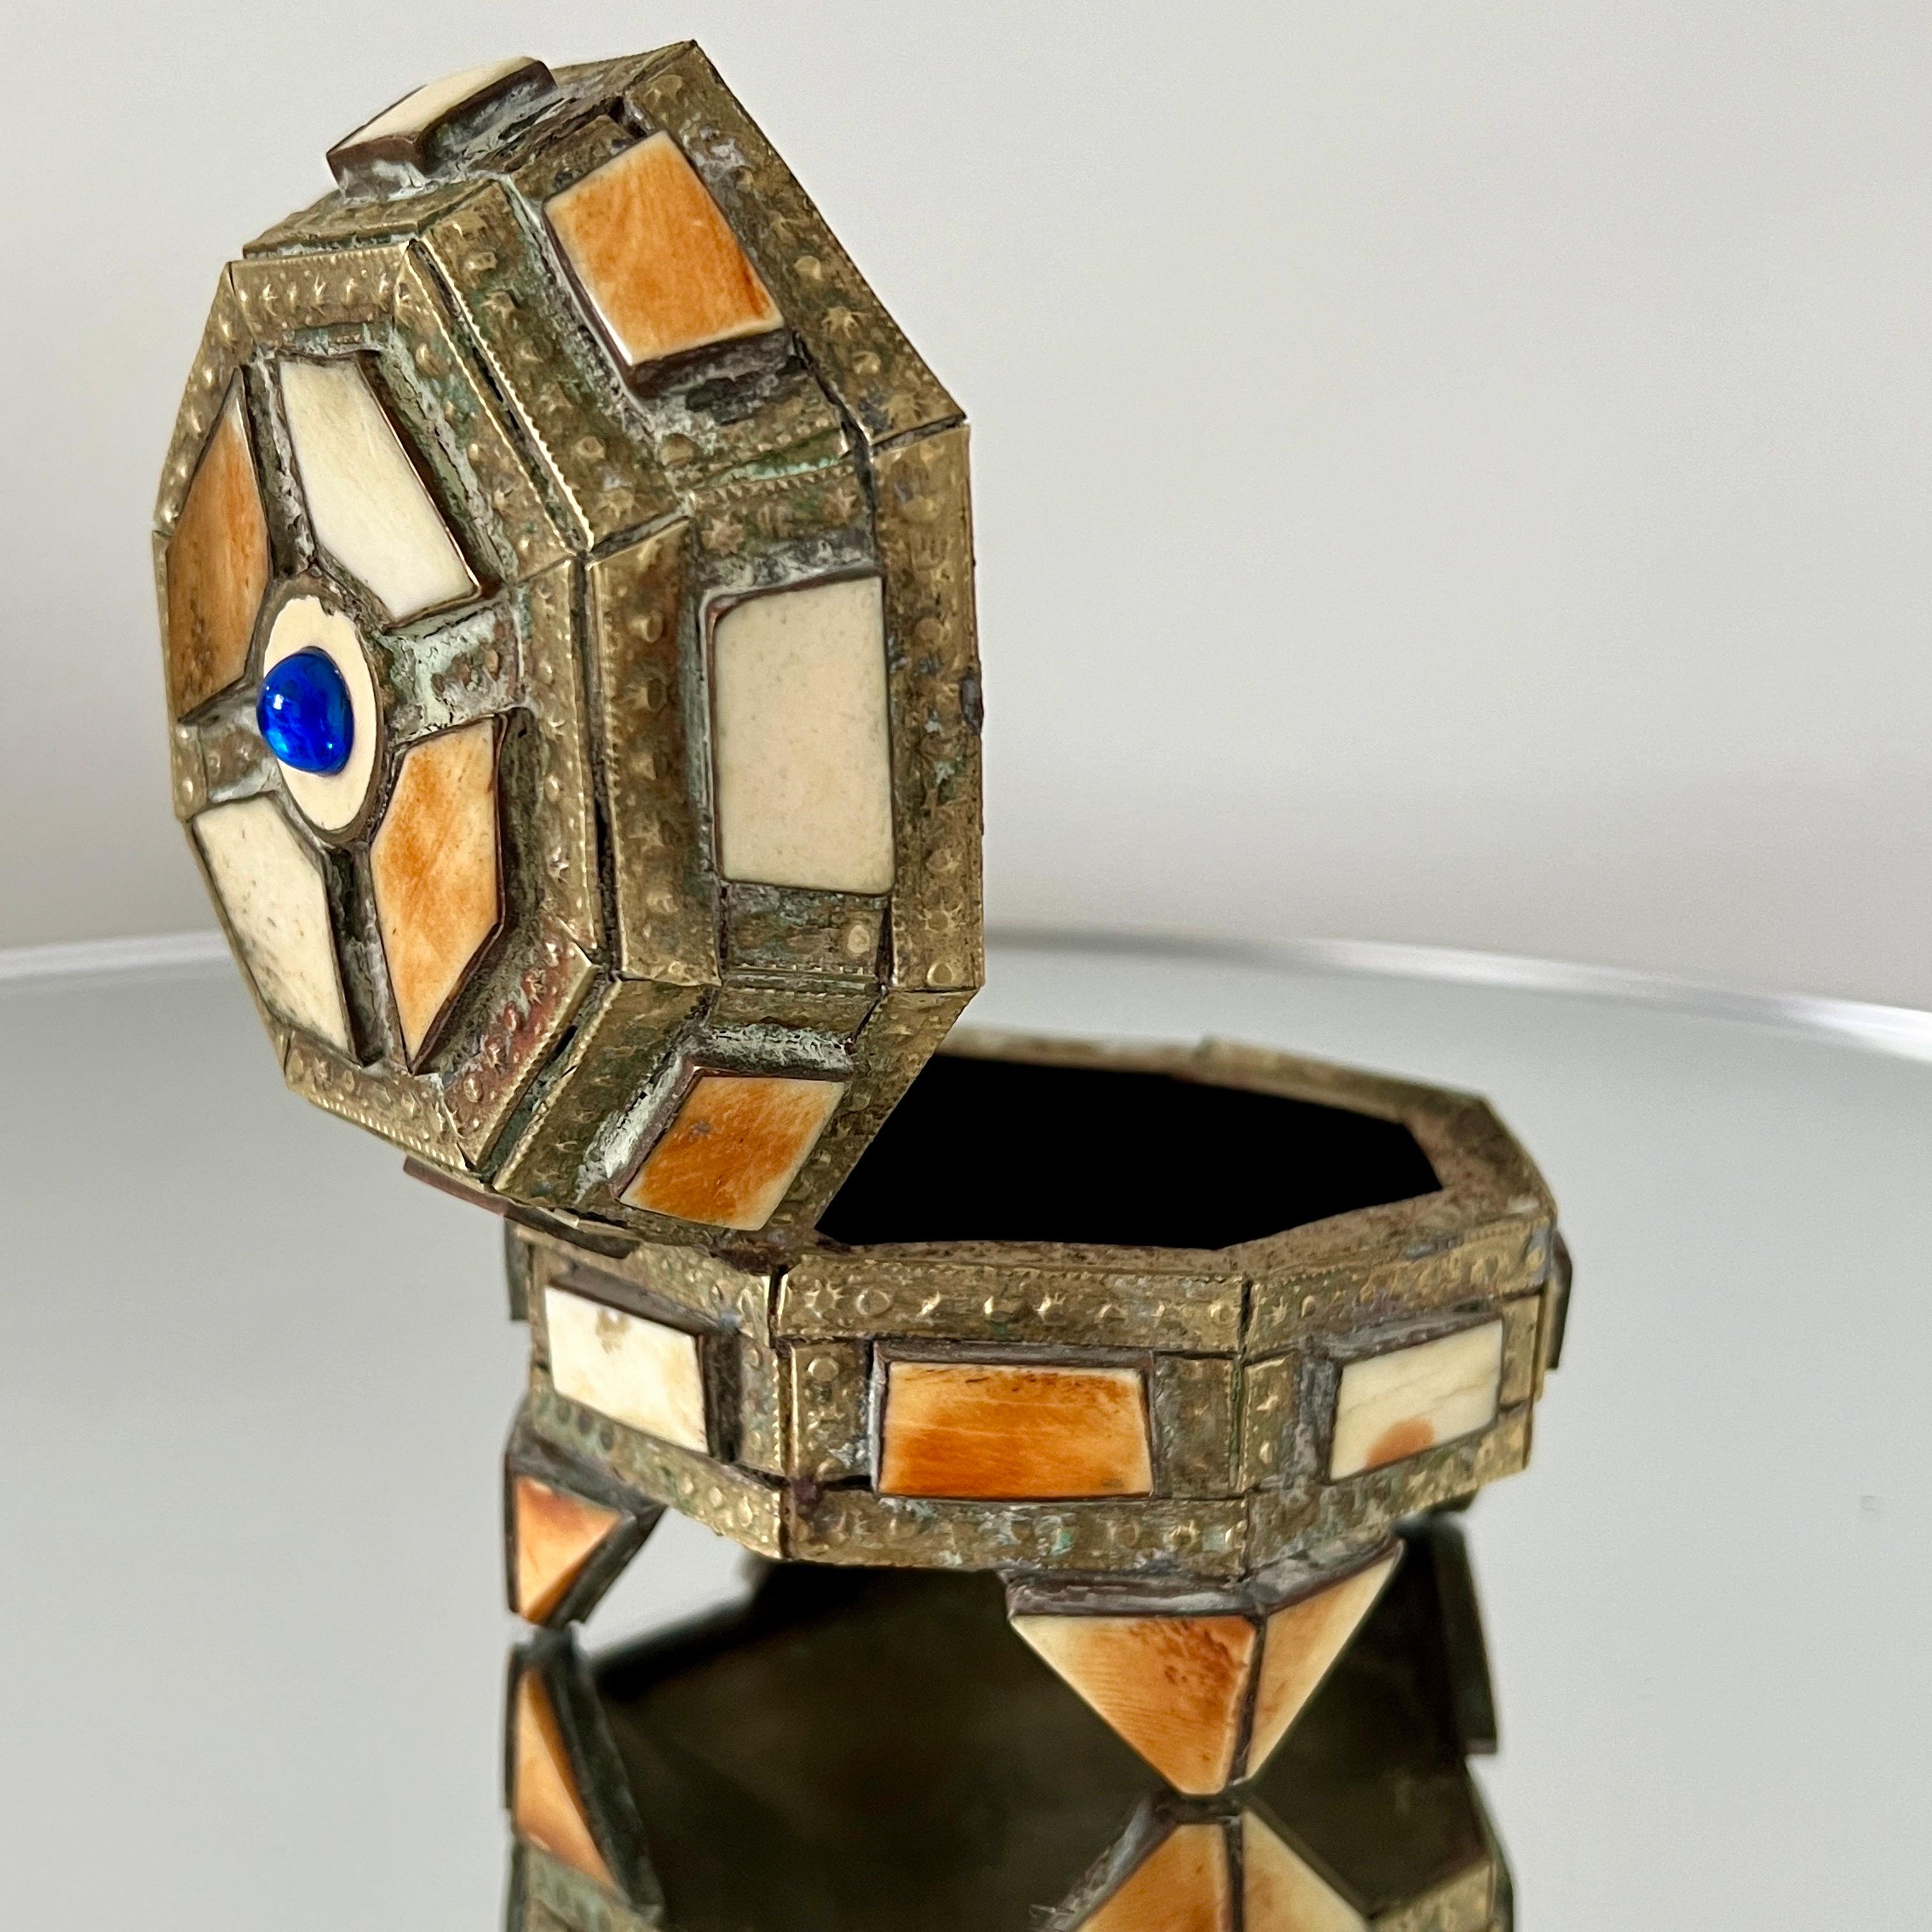 Late 20th Century Geometric Trinket Box in Brass with Bone Inlay, Handcrafted in Morocco, 1970's For Sale